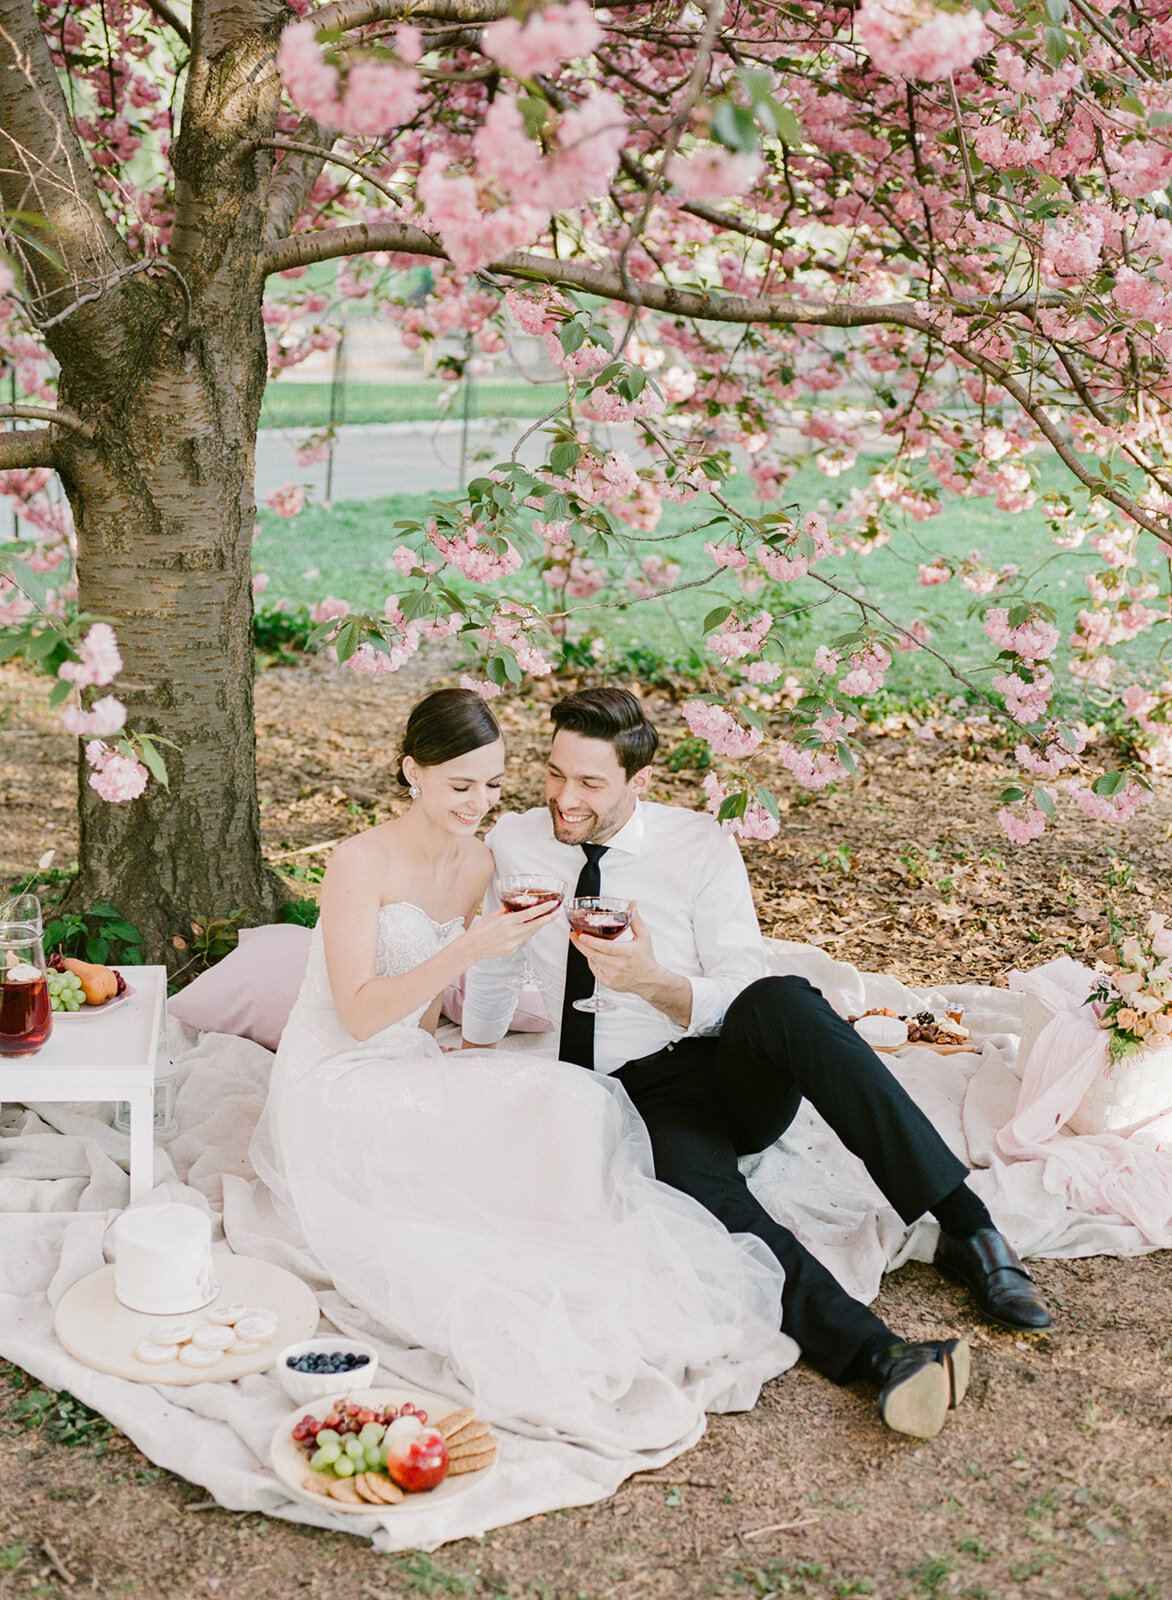 NYC_ELOPEMENT_WITH_PICNIC_IN_CENTRAL_PARK-263_websize